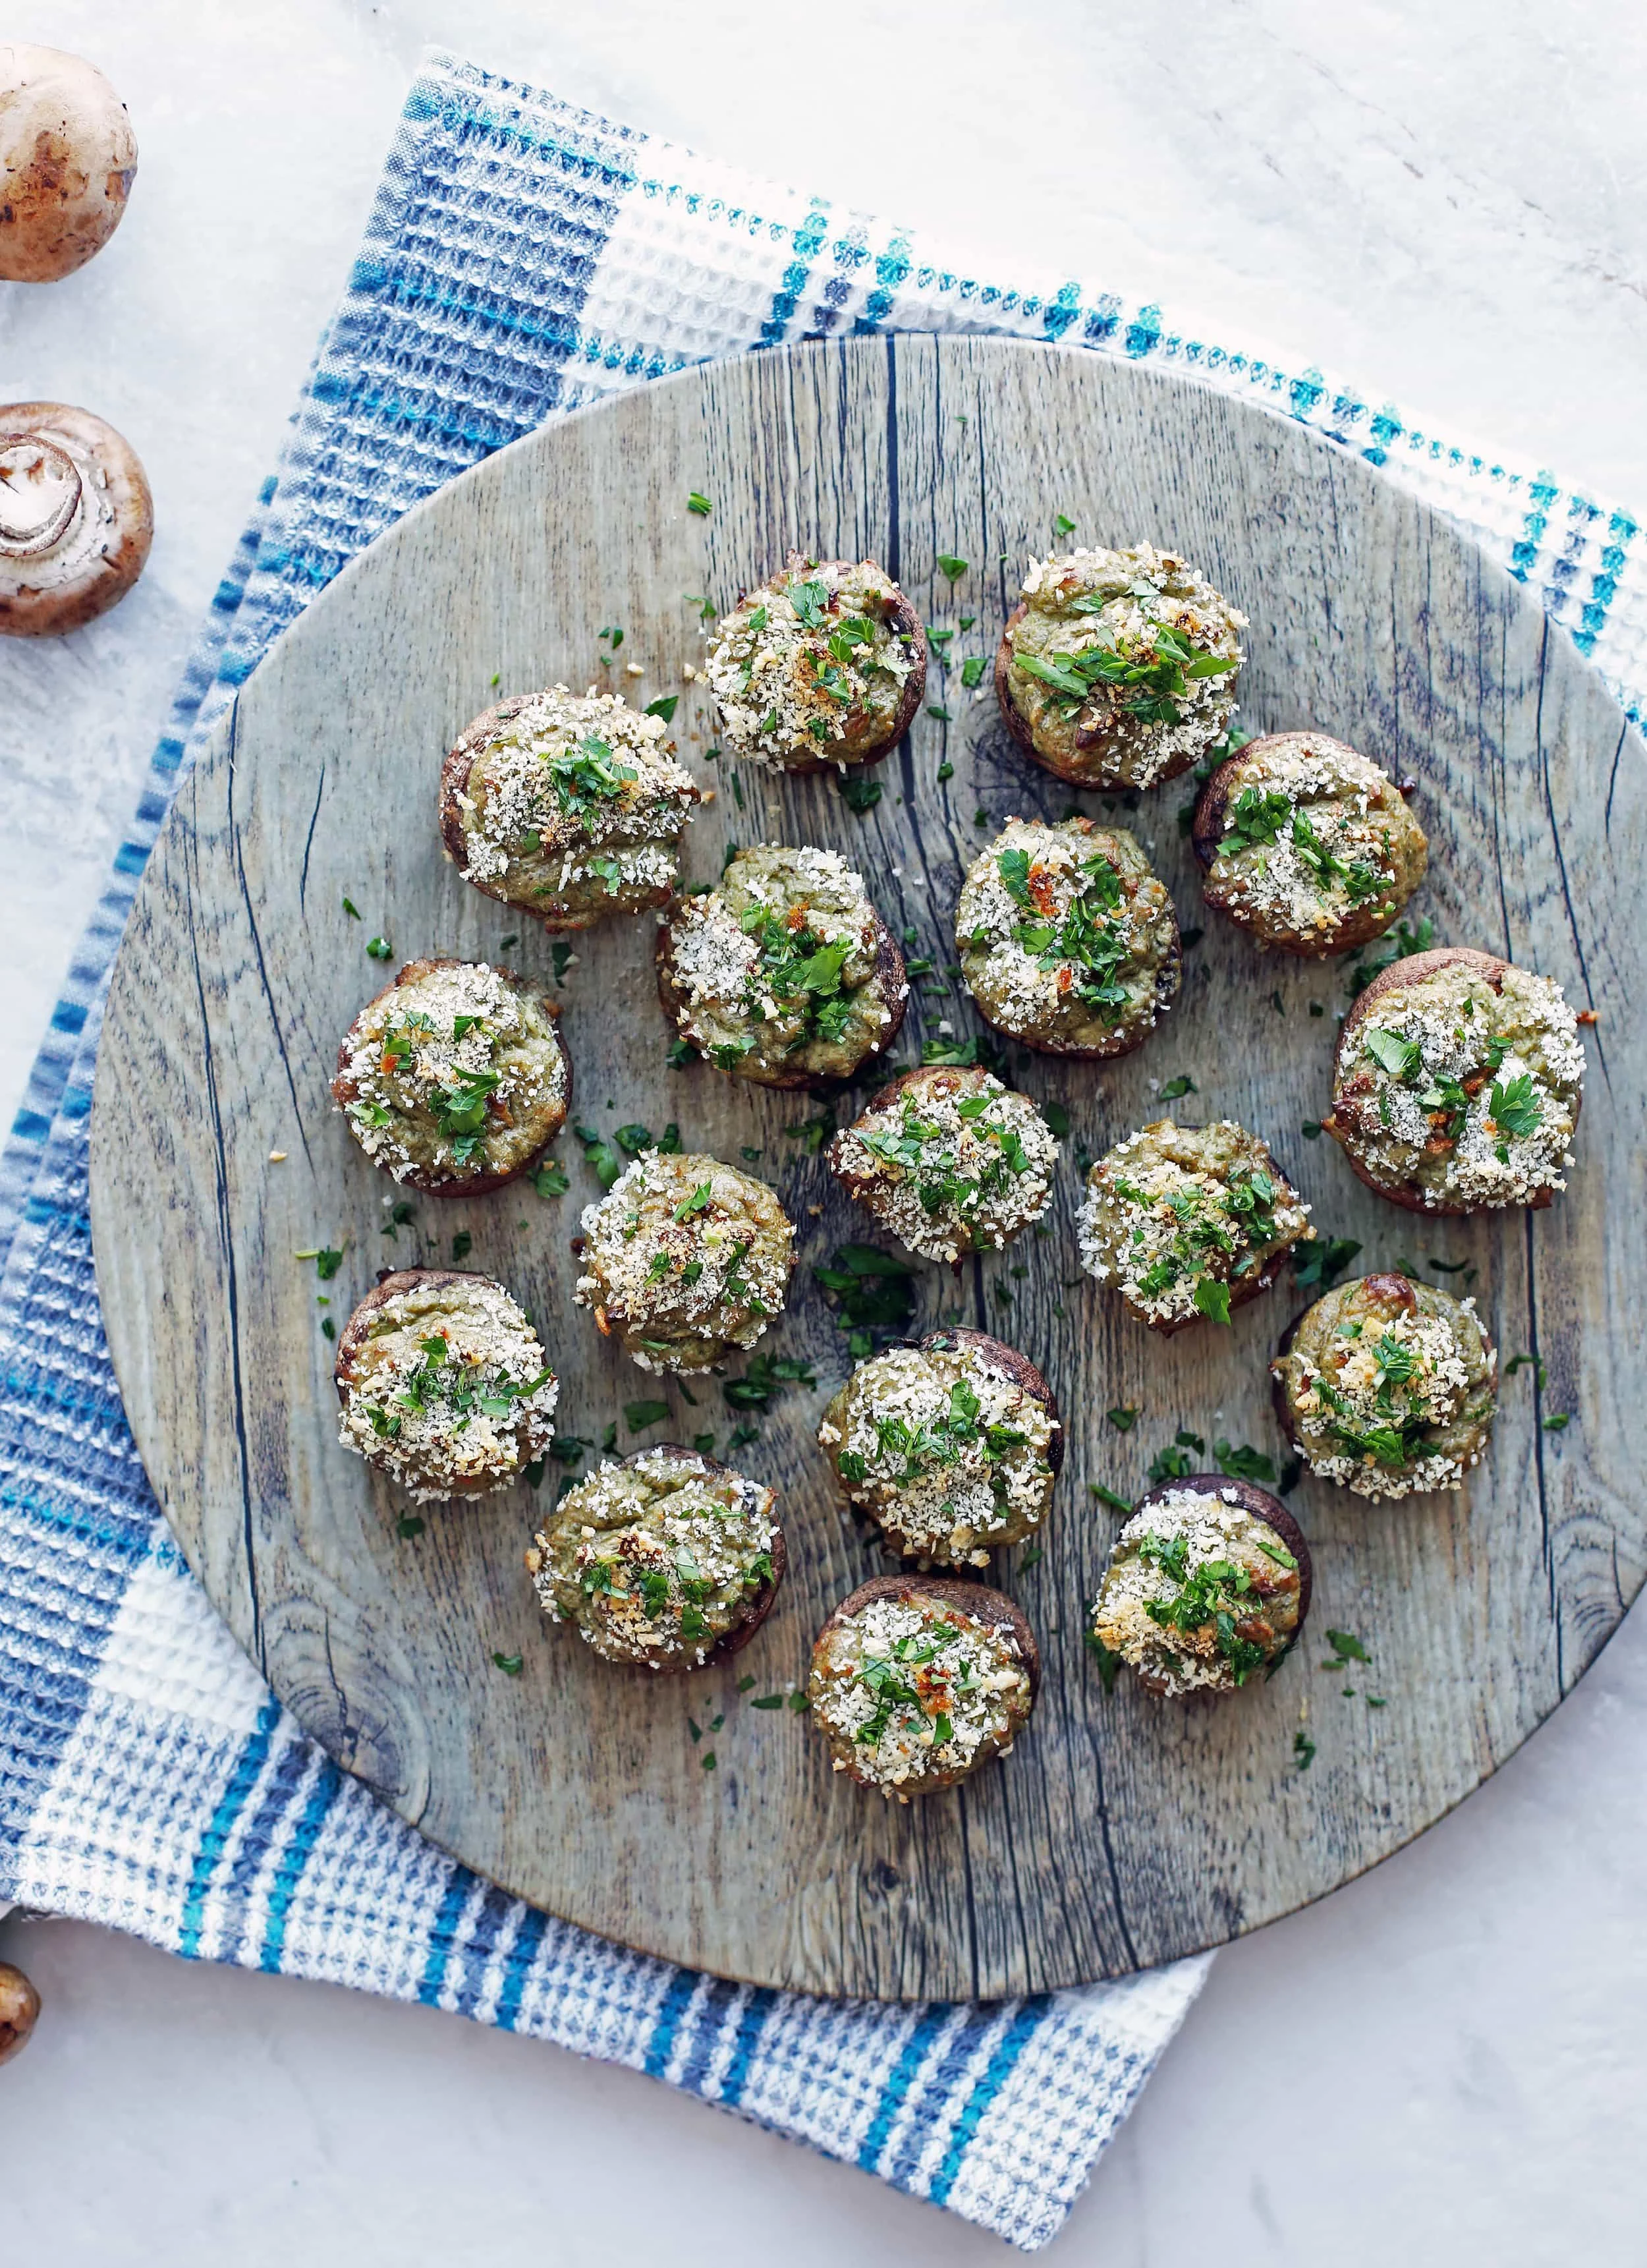 Overhead view of Baked Cheese Stuffed Mushrooms with breadcrumb and parsley topping.